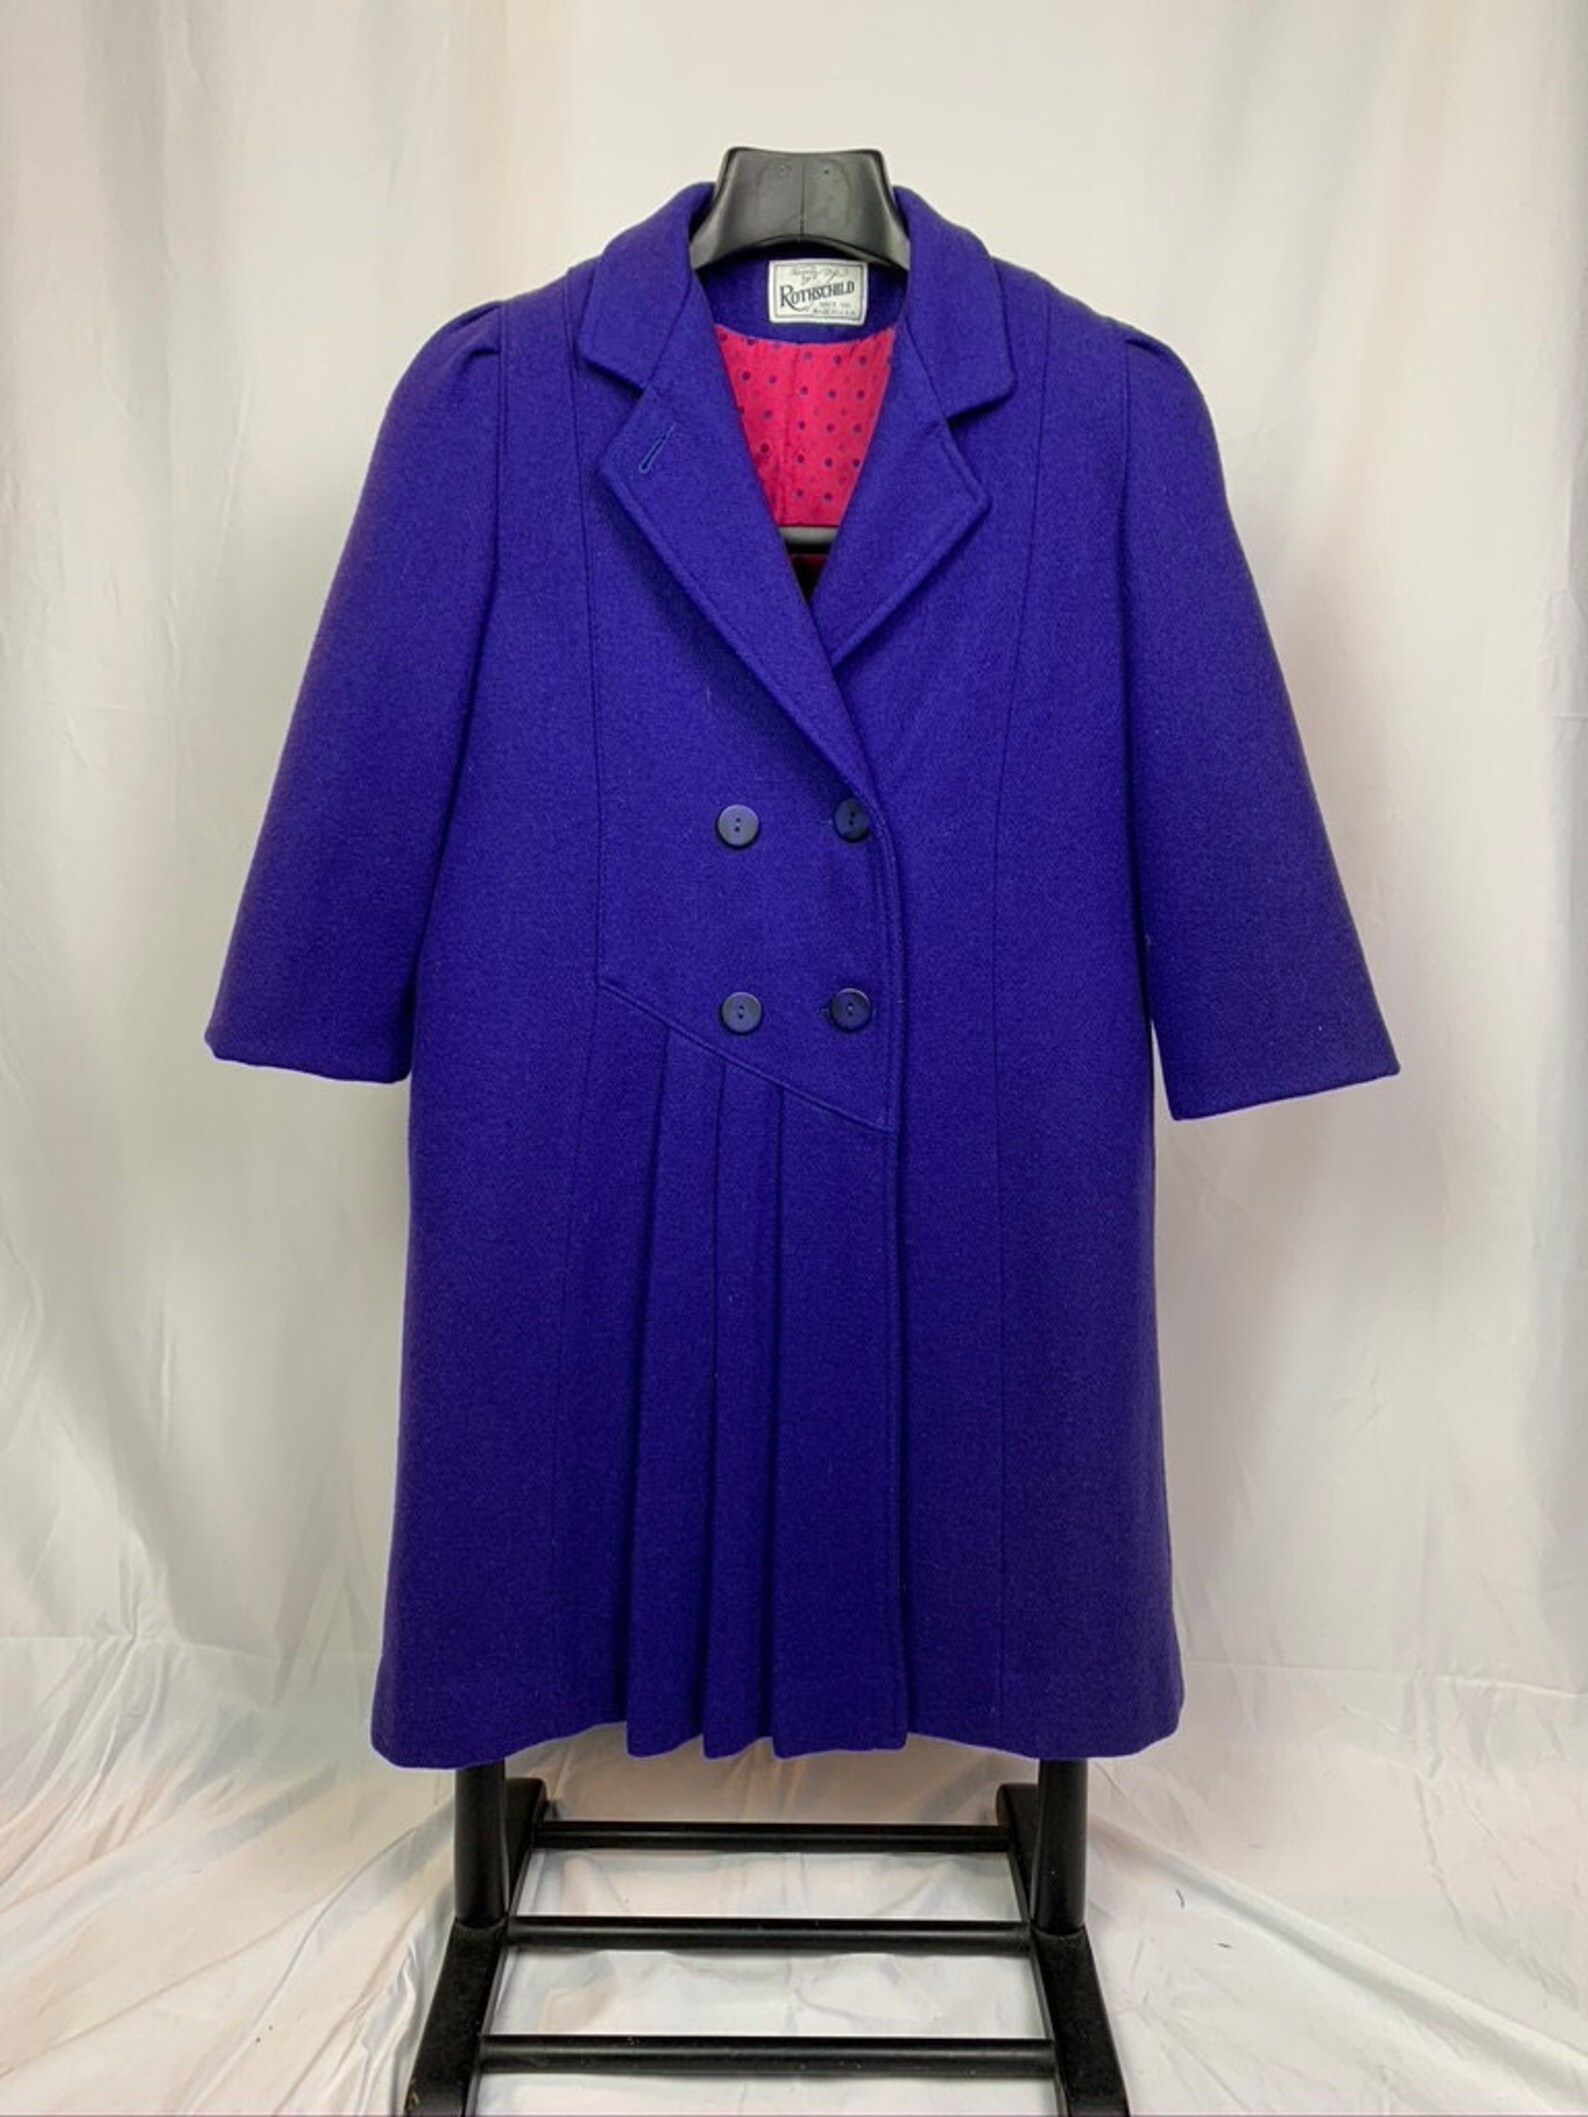 Rothschild Wool Winter Coat With Pleat Details Size Petite Small - Etsy